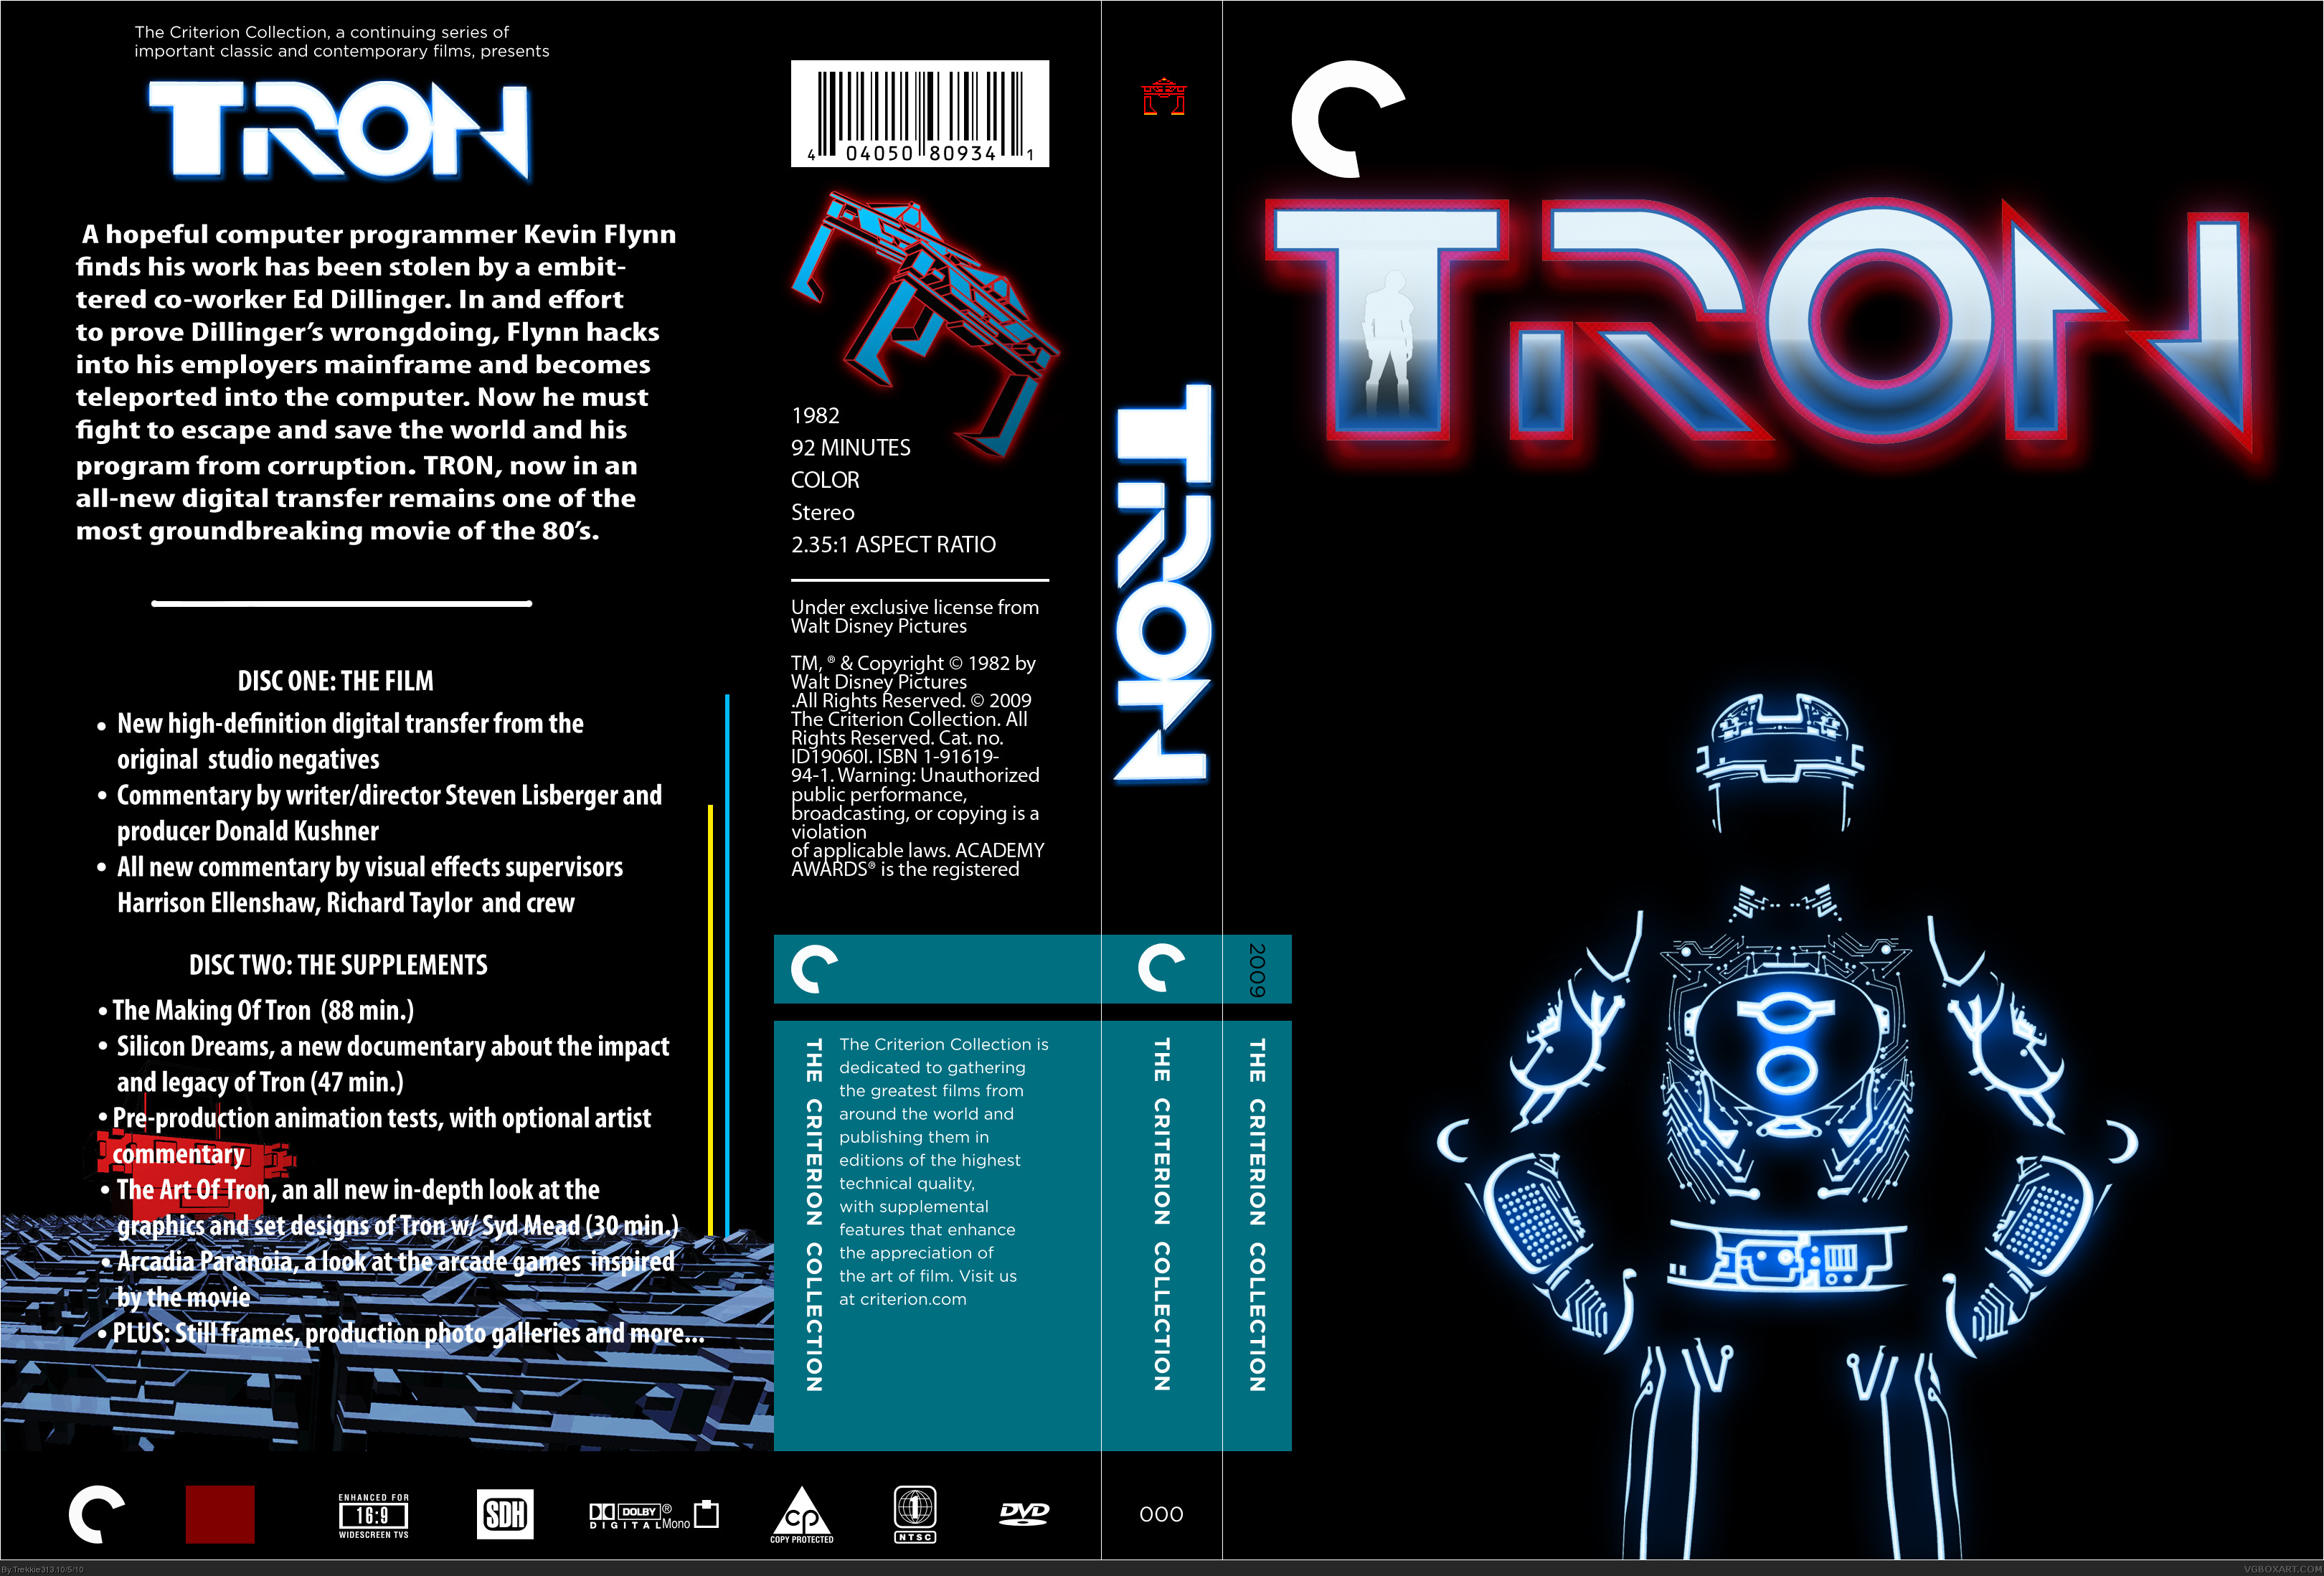 TRON: Criterion Collection Movies Box Art Cover by Trekkie313